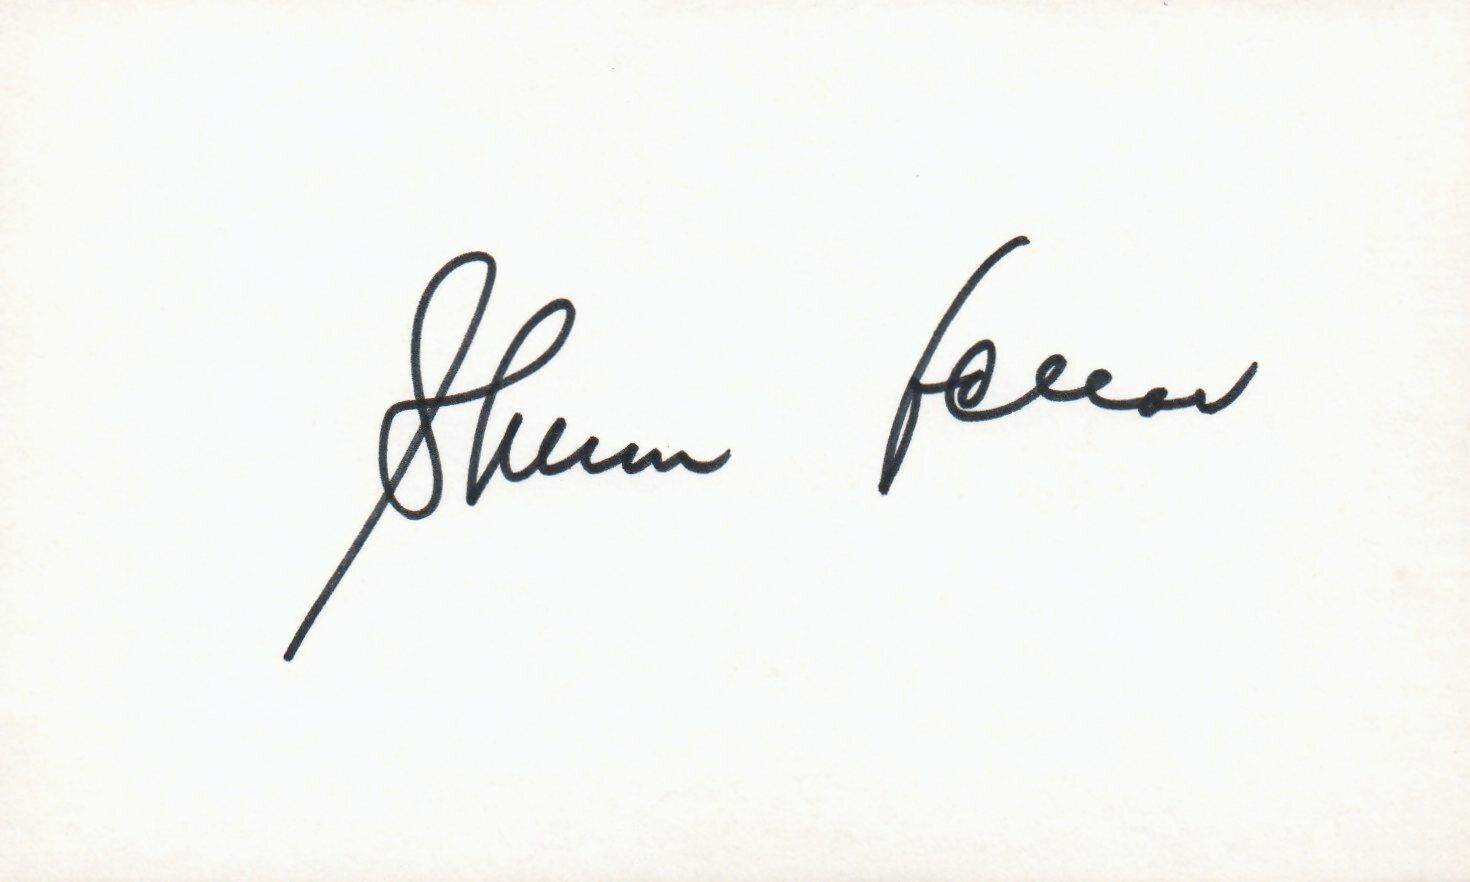 Sherm Lollar 1959 White Sox Deceased 1977 Signed 3x5 Index Card with JSA COA